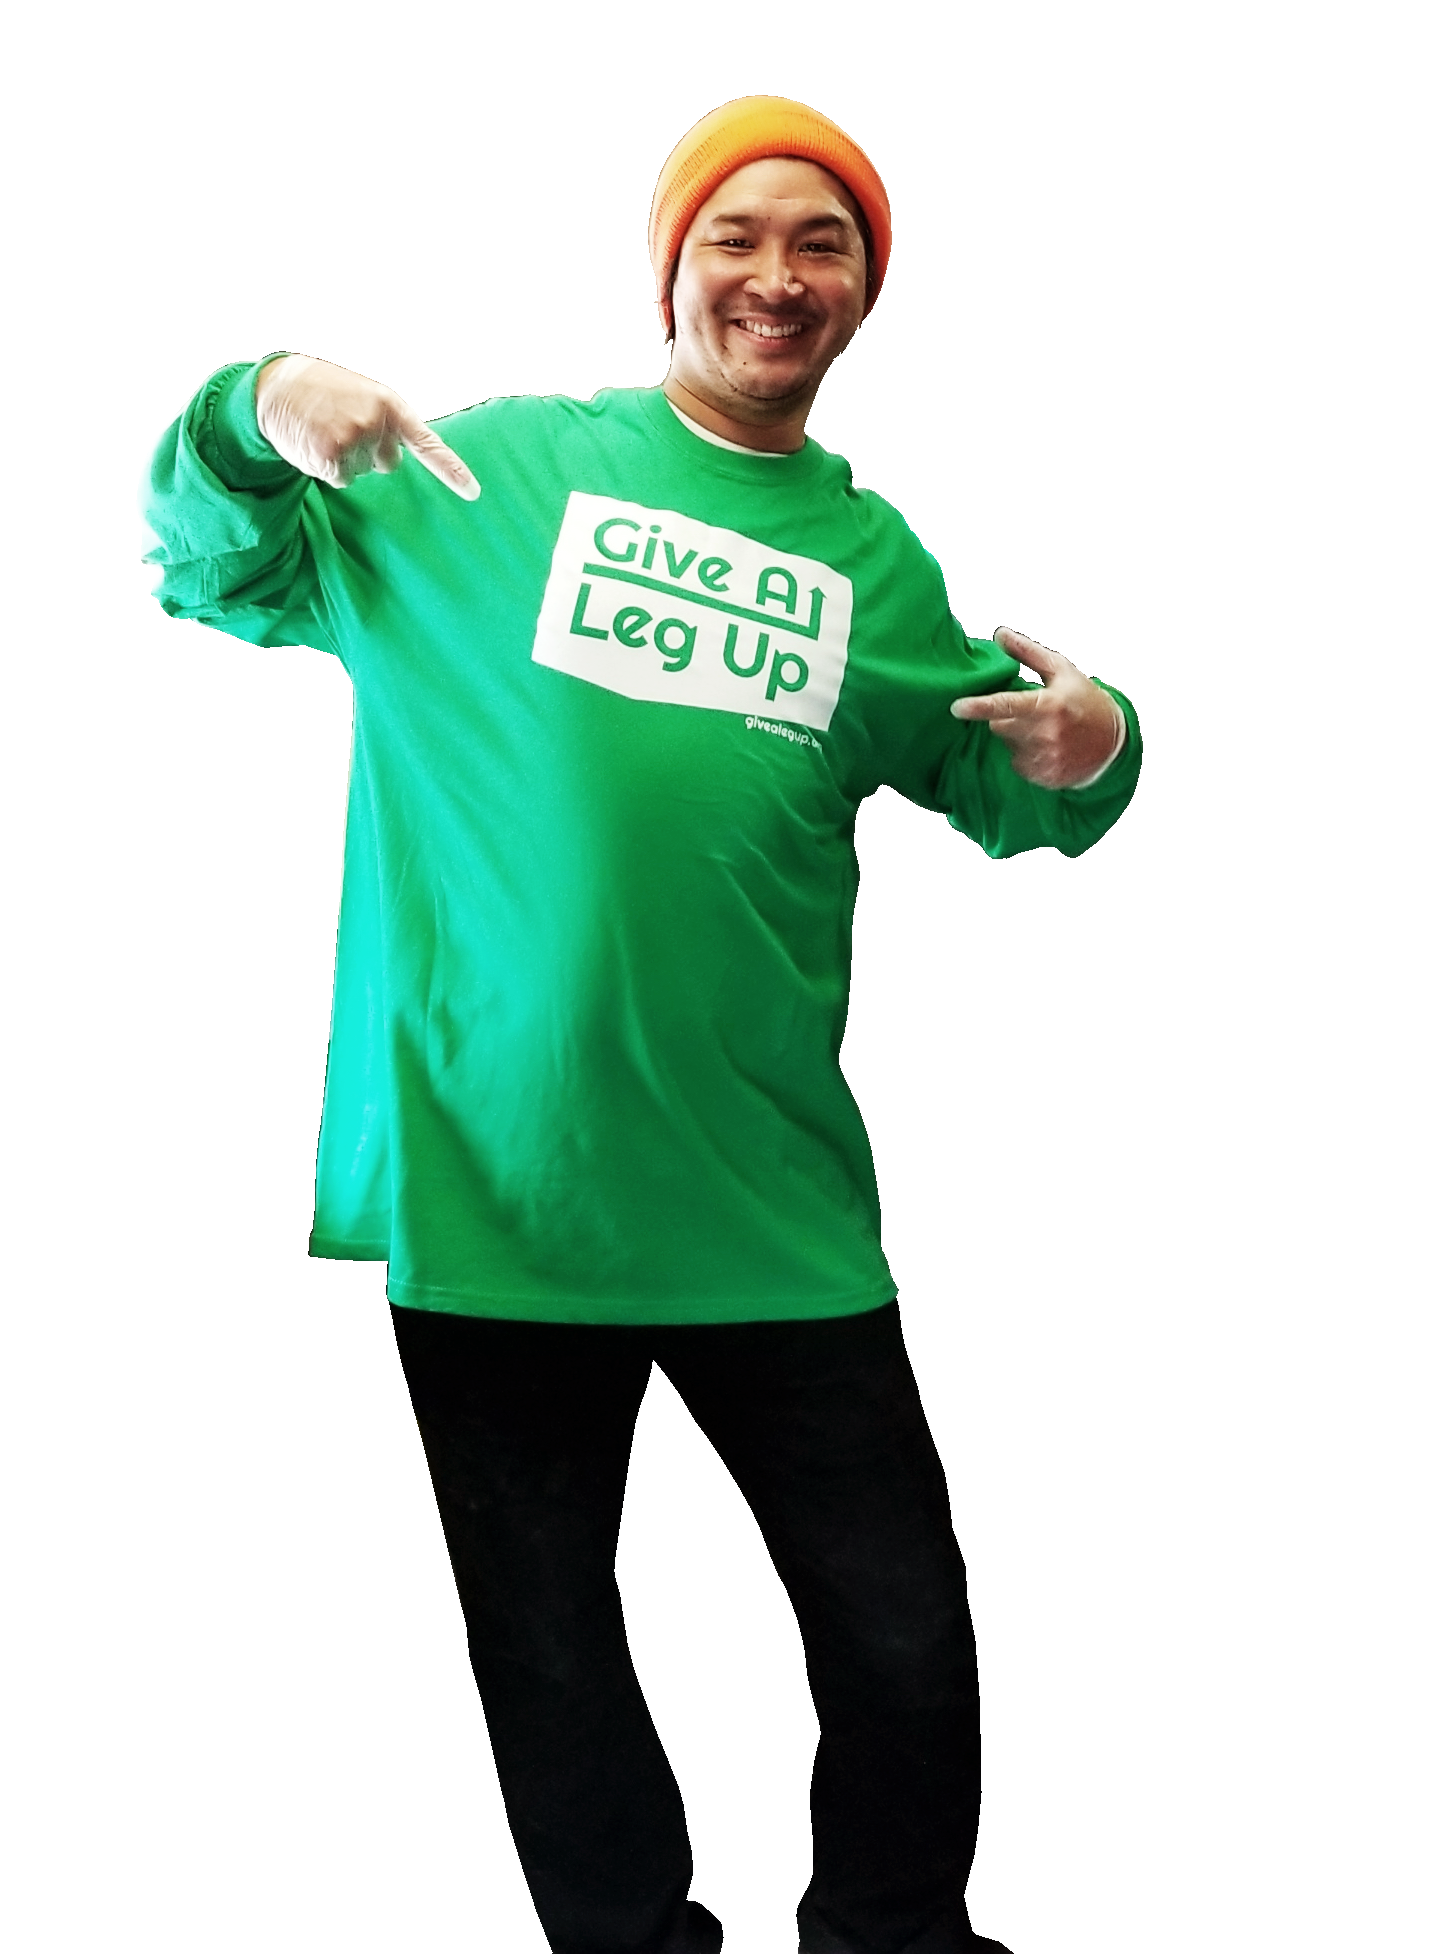 A man wearing a green t-shirt that says give all leg up